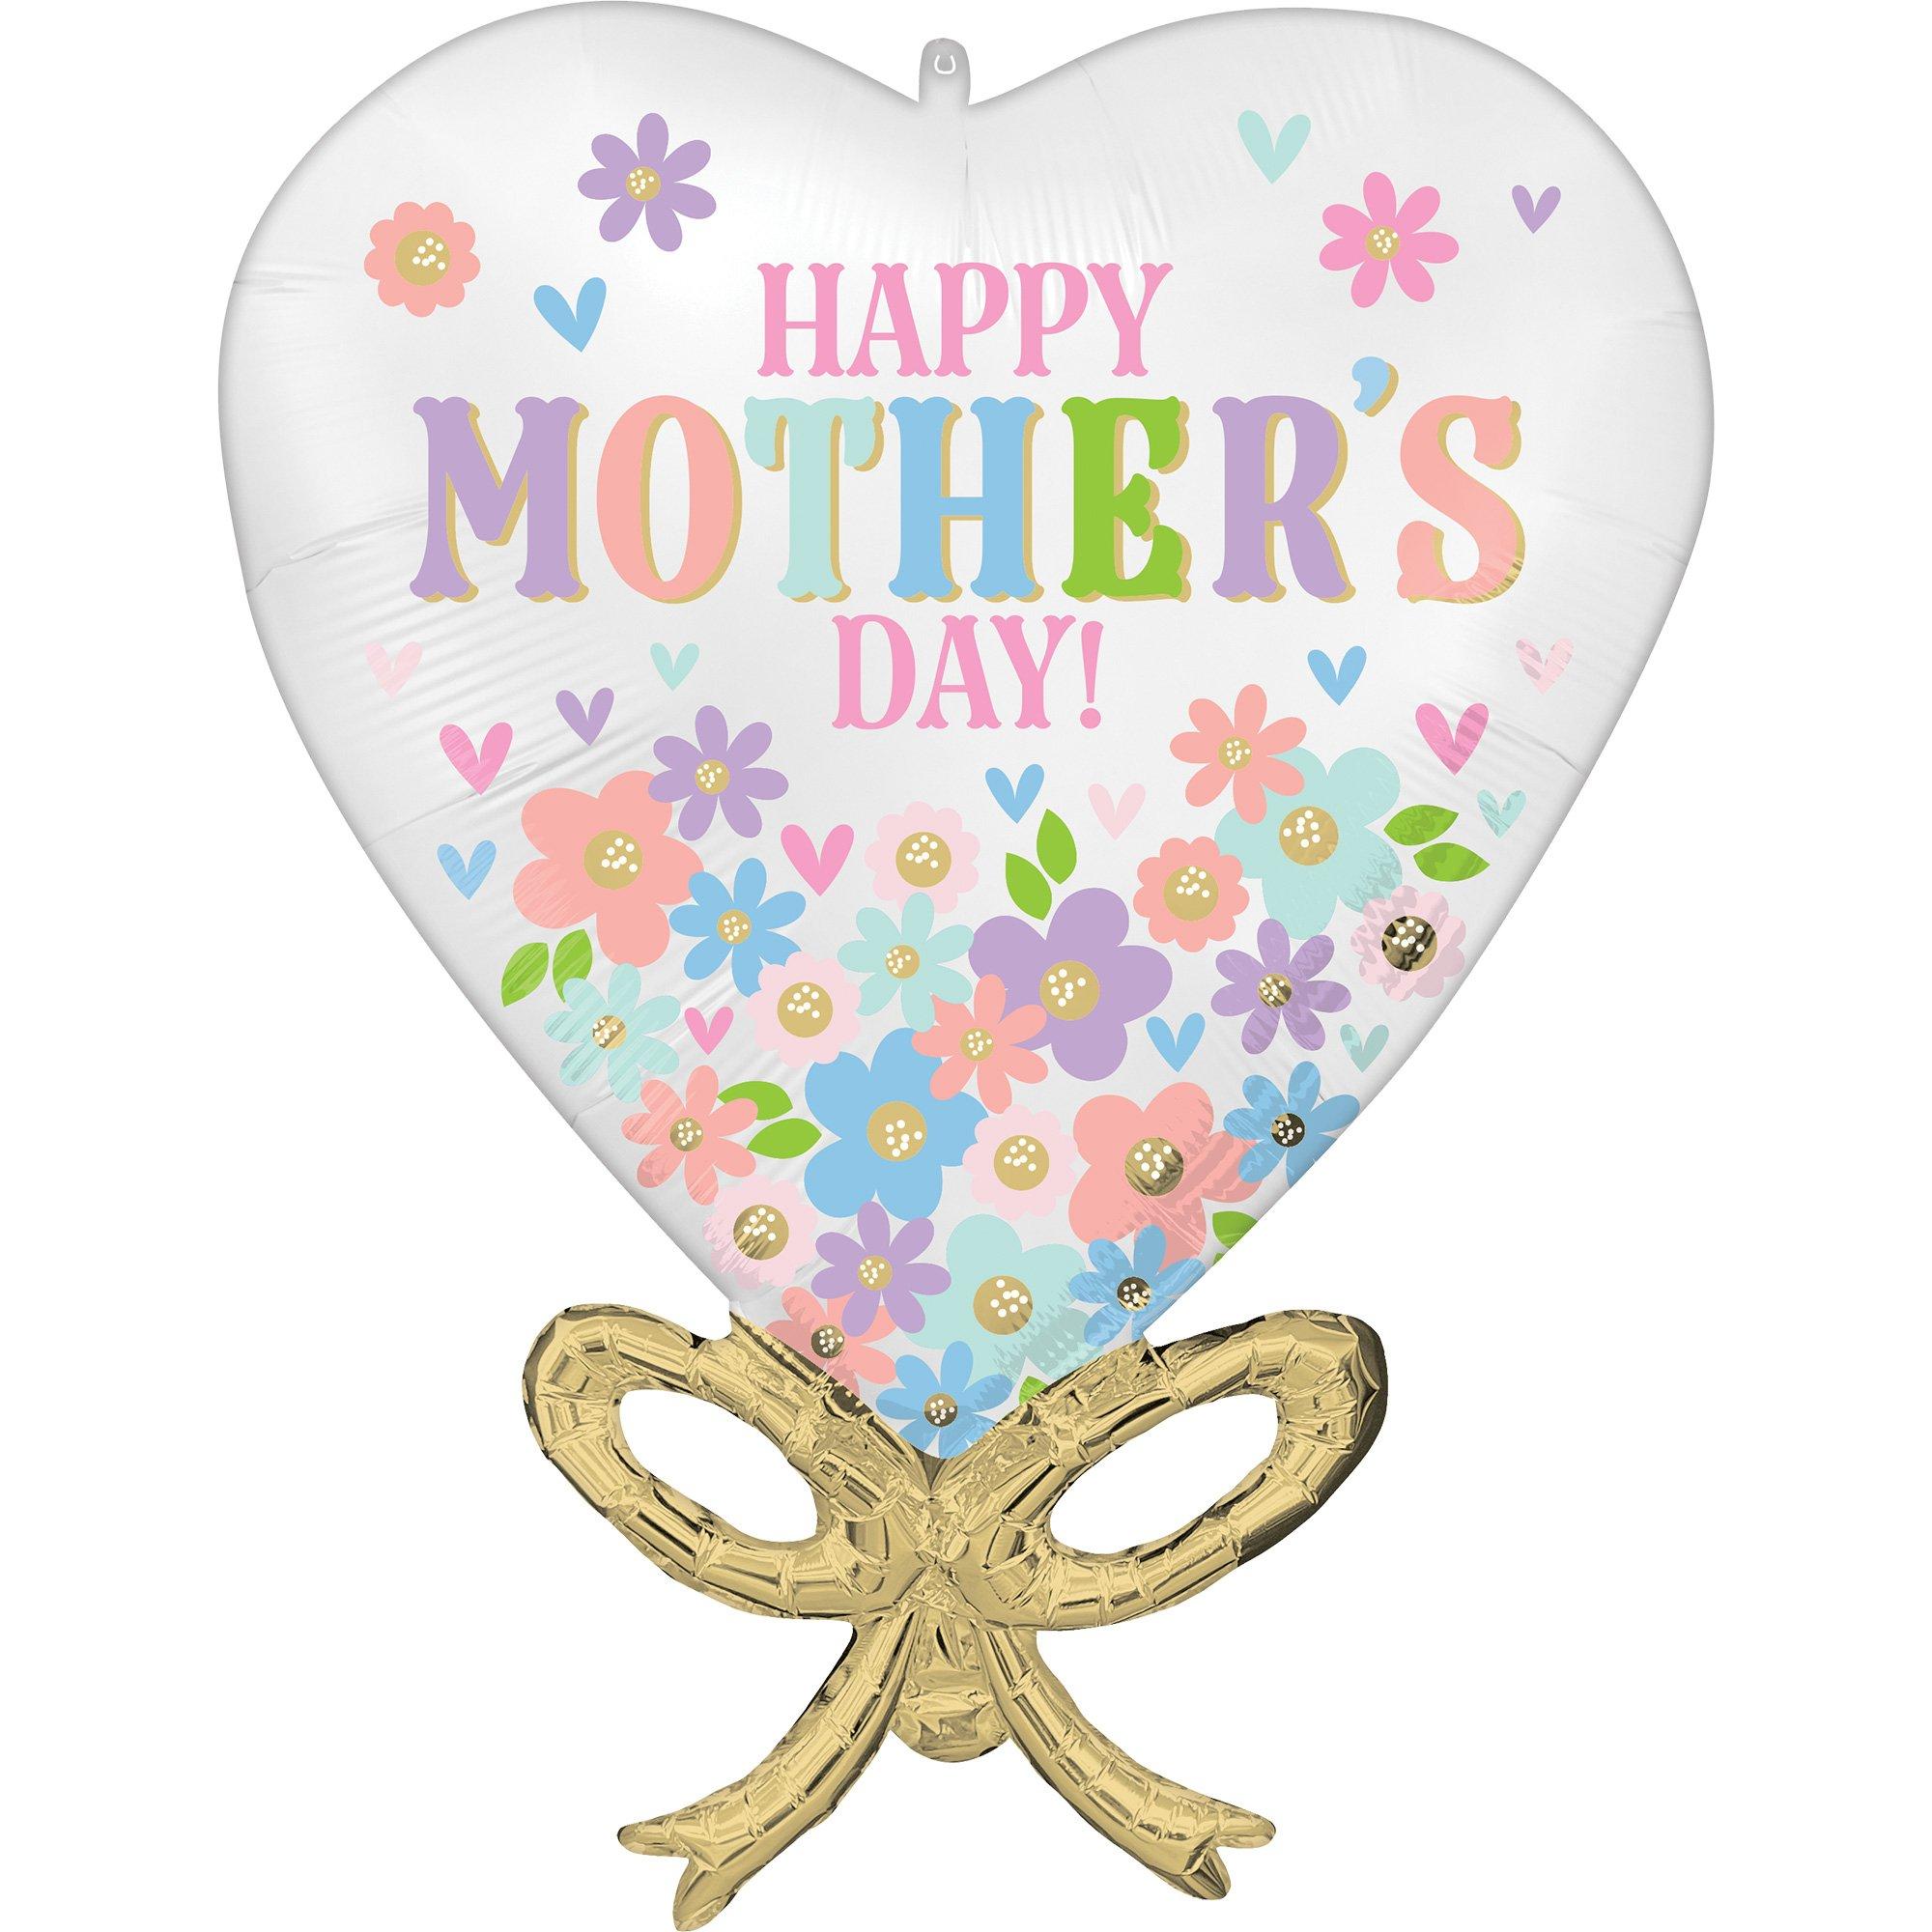 Satin Daisy Chain Happy Mother's Day Heart Foil Balloon, 20in x 28in